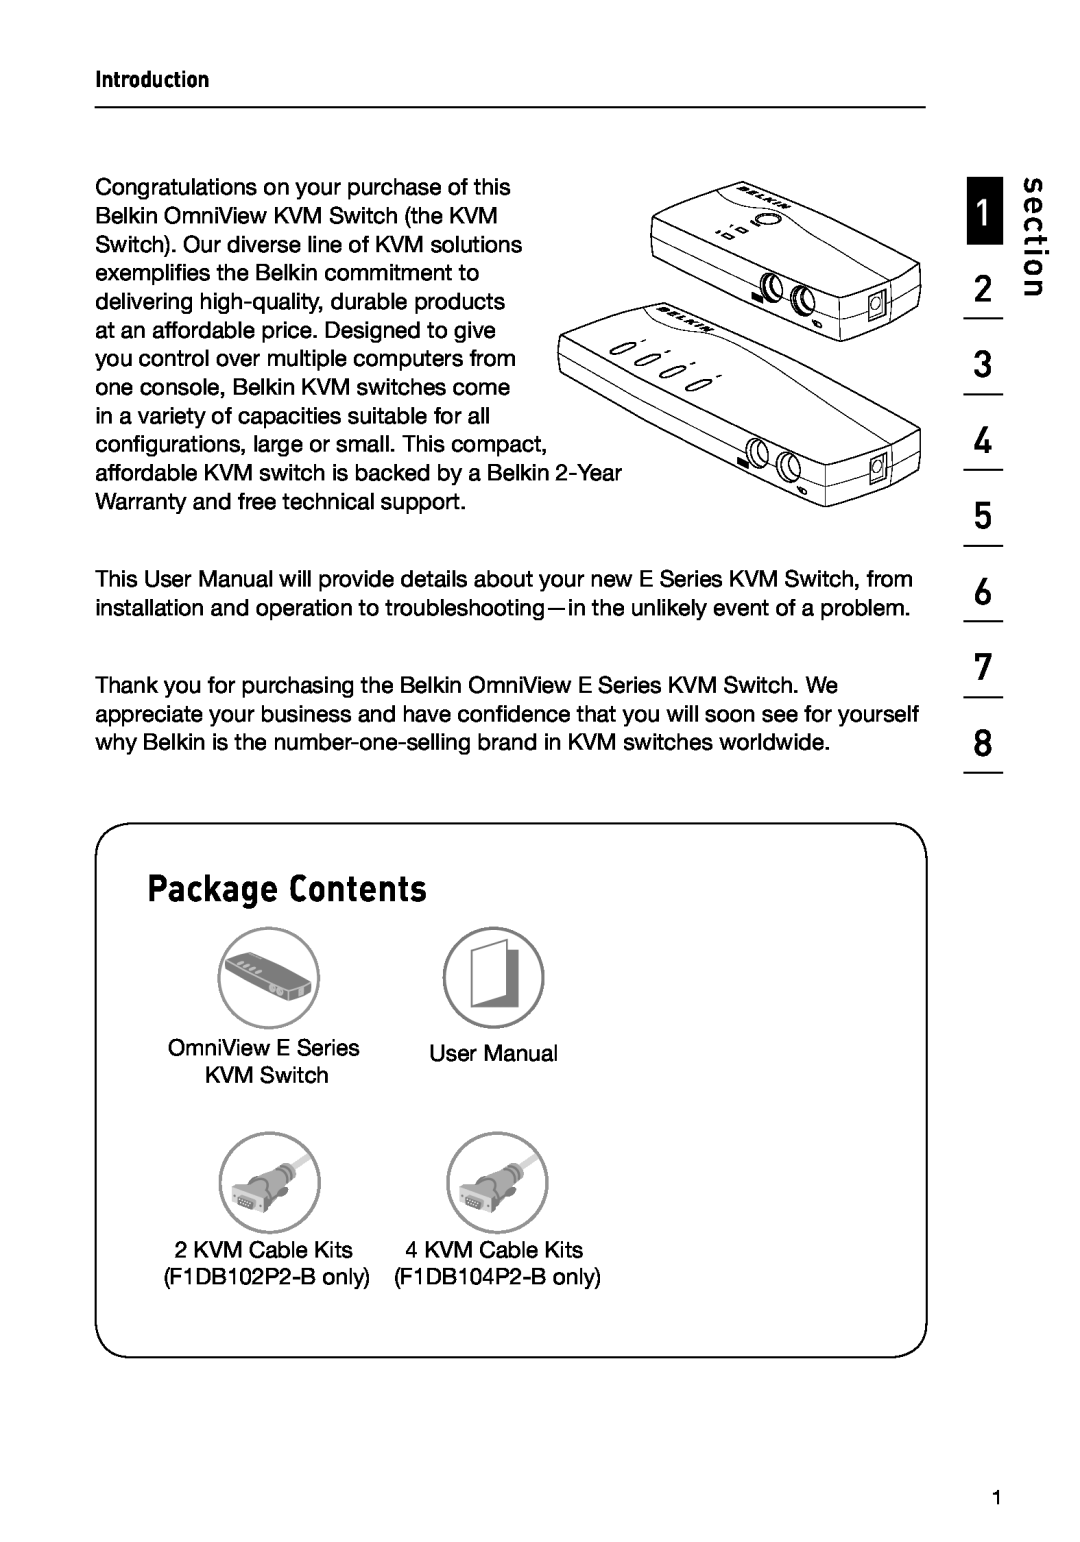 Belkin F1DB102P2 user manual Package Contents, section 